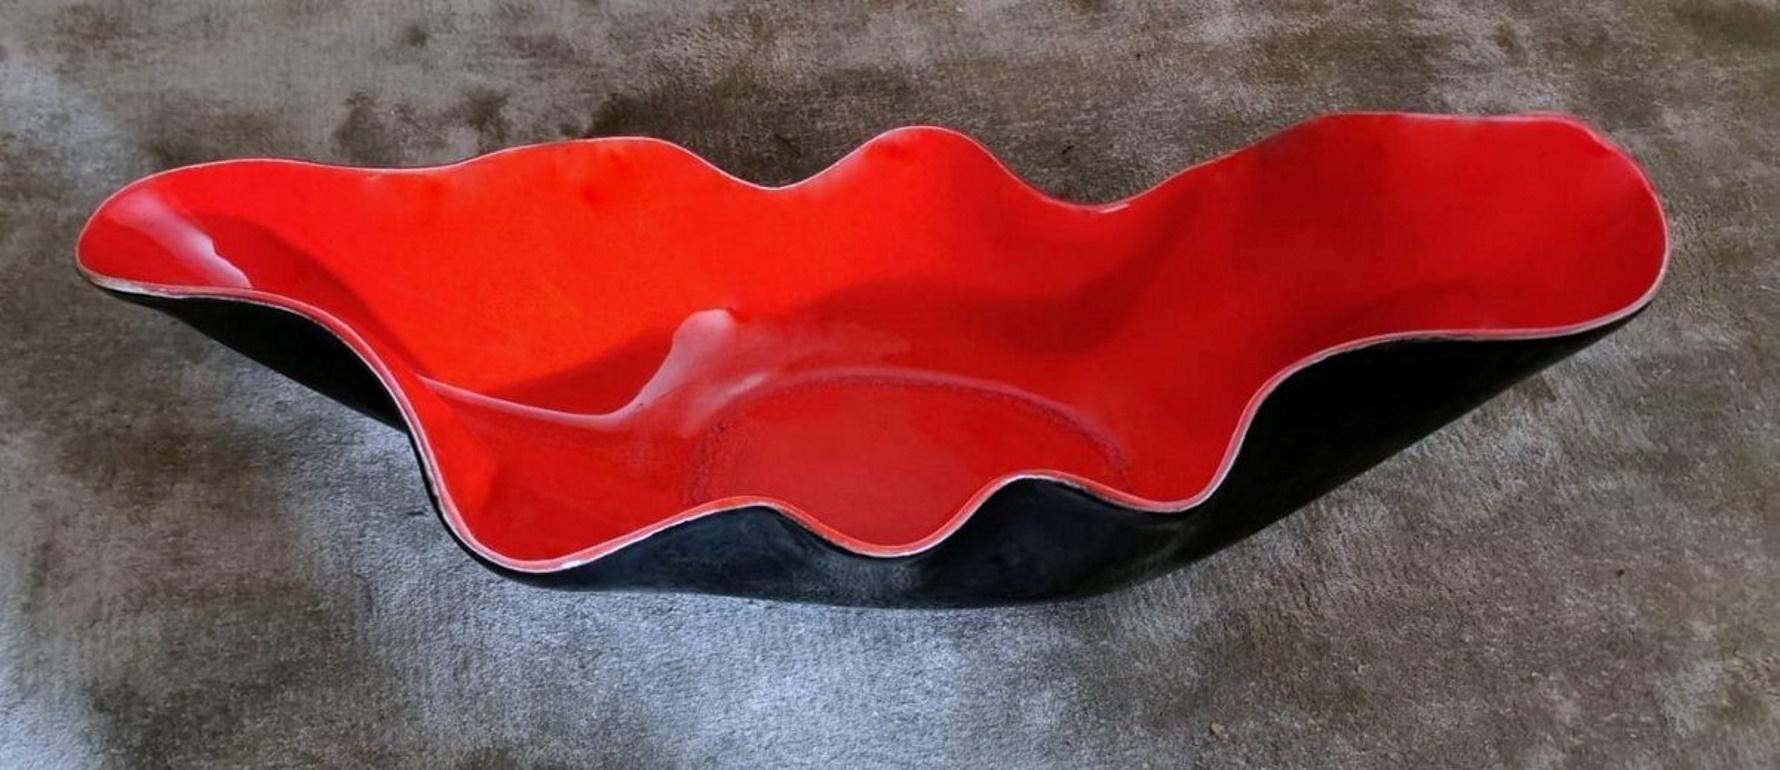 Enameled Rockabilly Style French Centrepiece Red and Black Ceramic For Sale